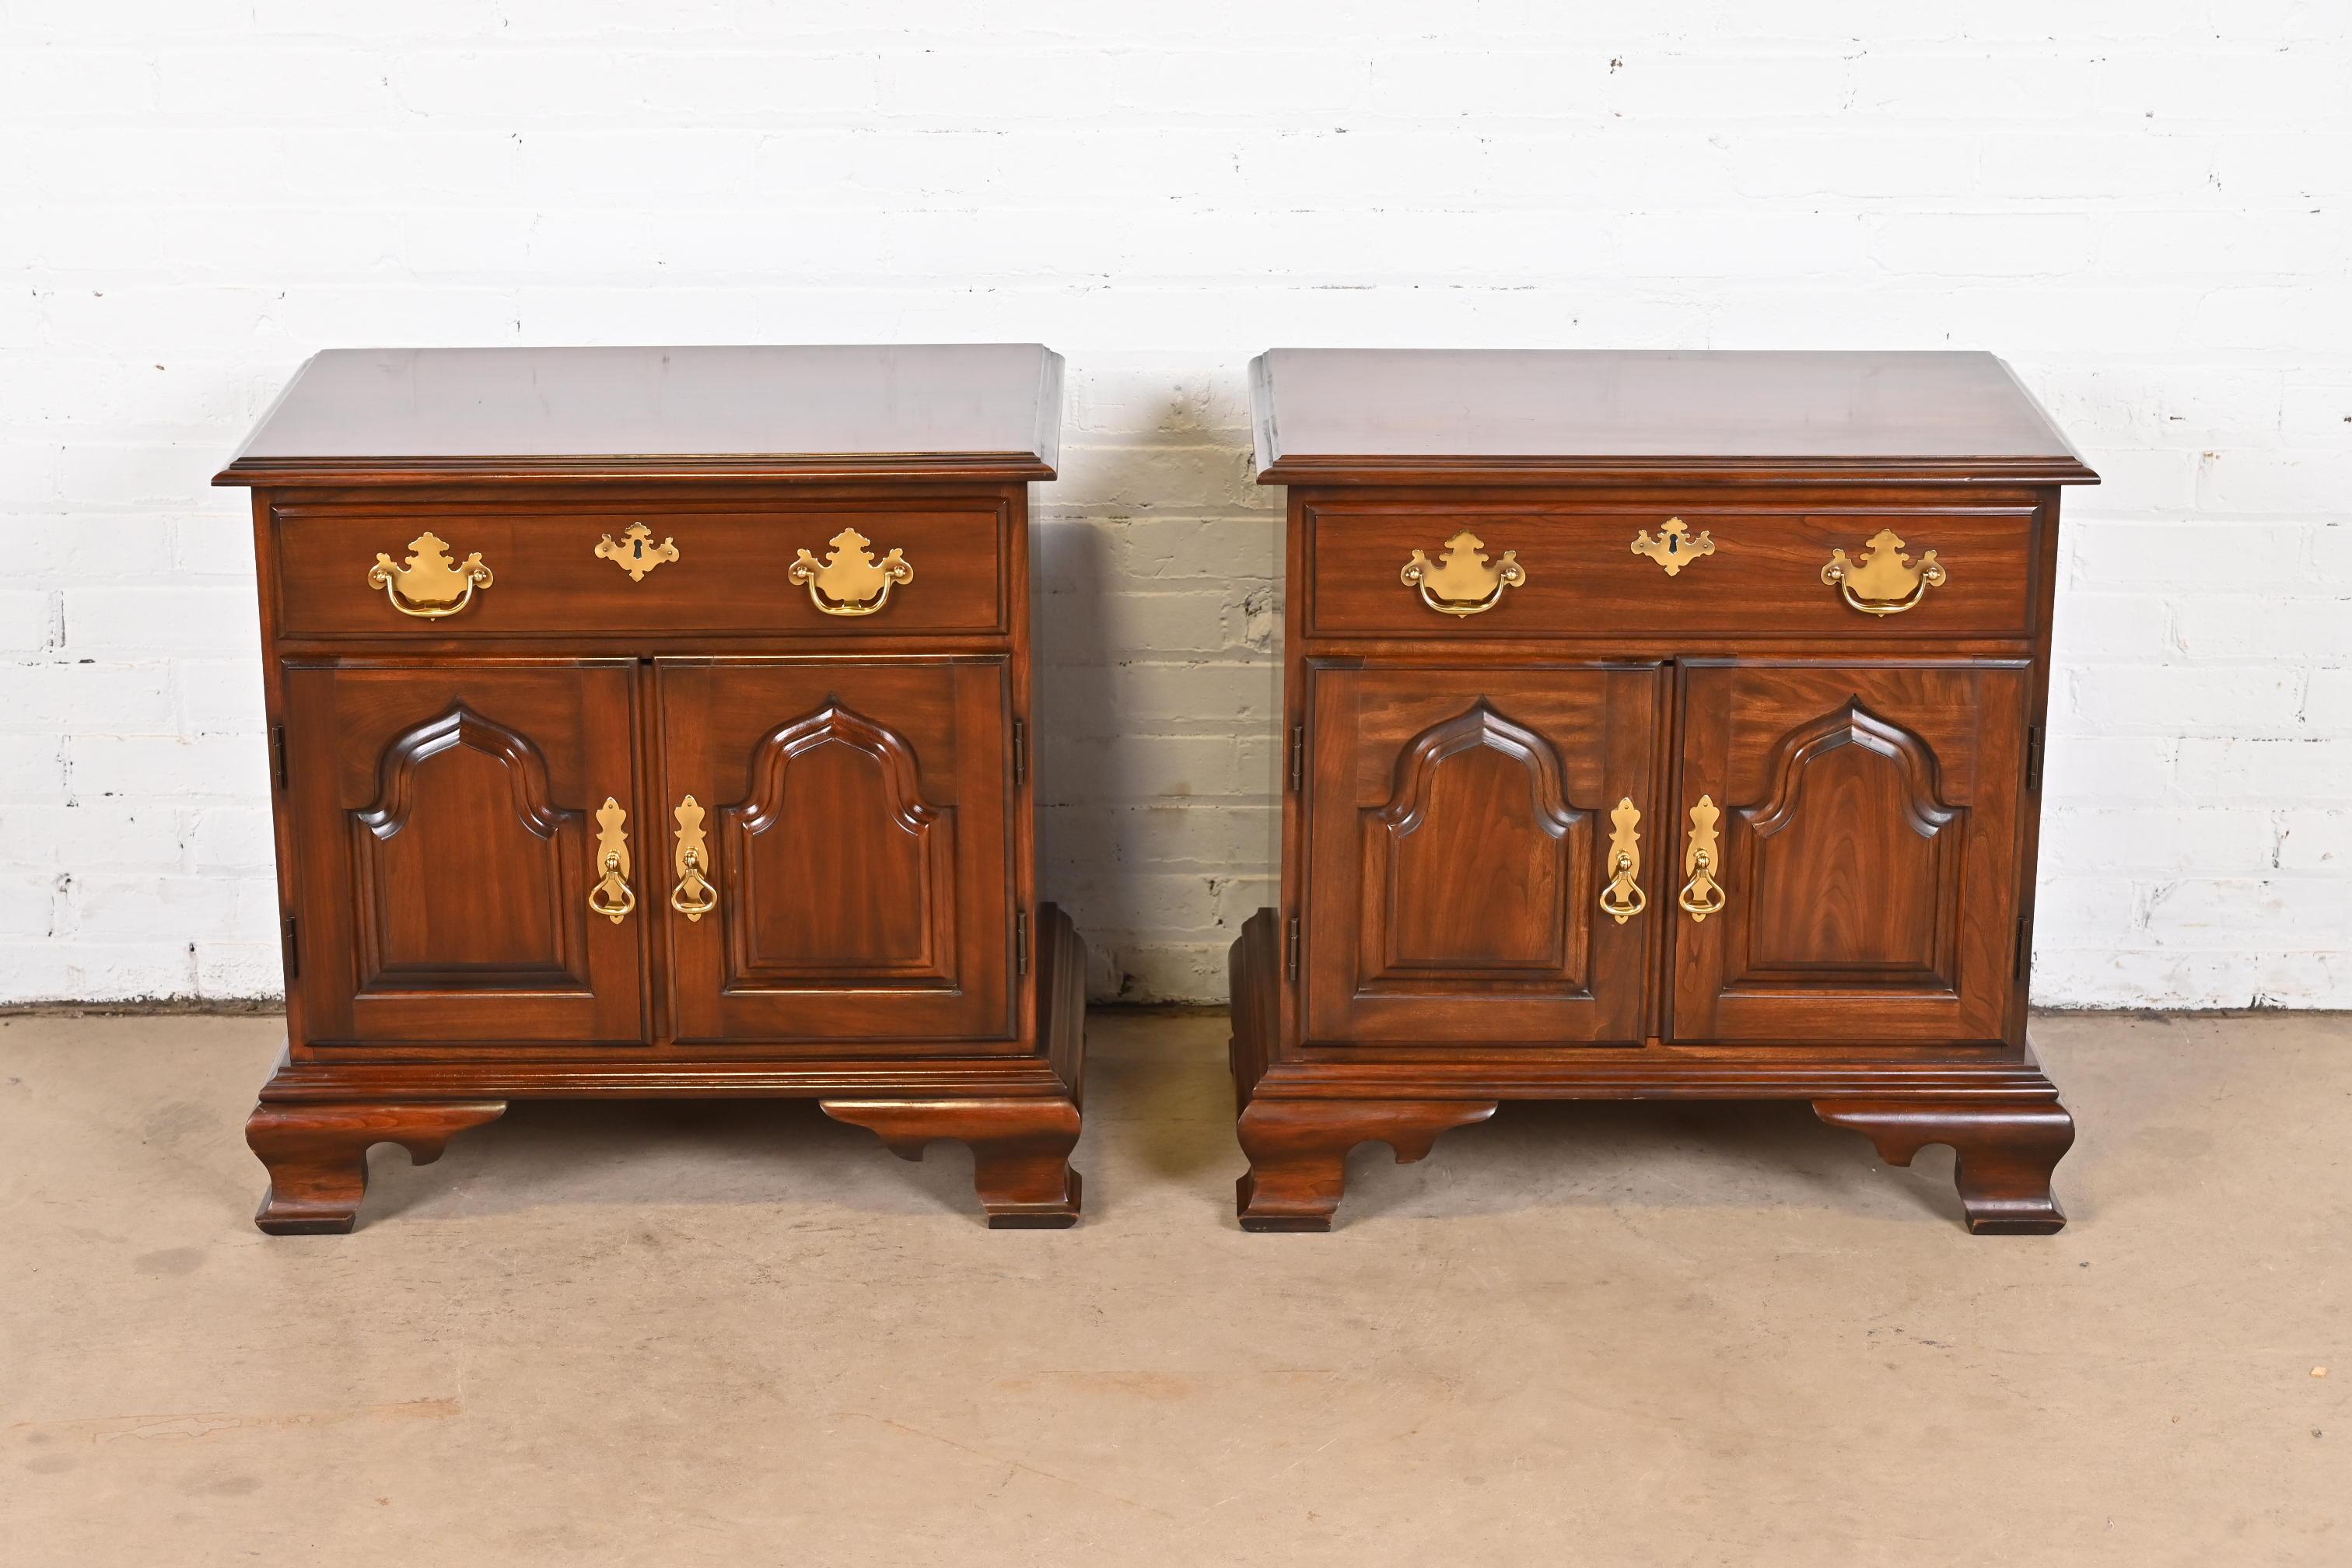 An exceptional pair of Georgian or Chippendale style nightstands

By Harden Furniture

USA, Late 20th century

Solid carved cherry wood, with original brass hardware.

Measures: 26